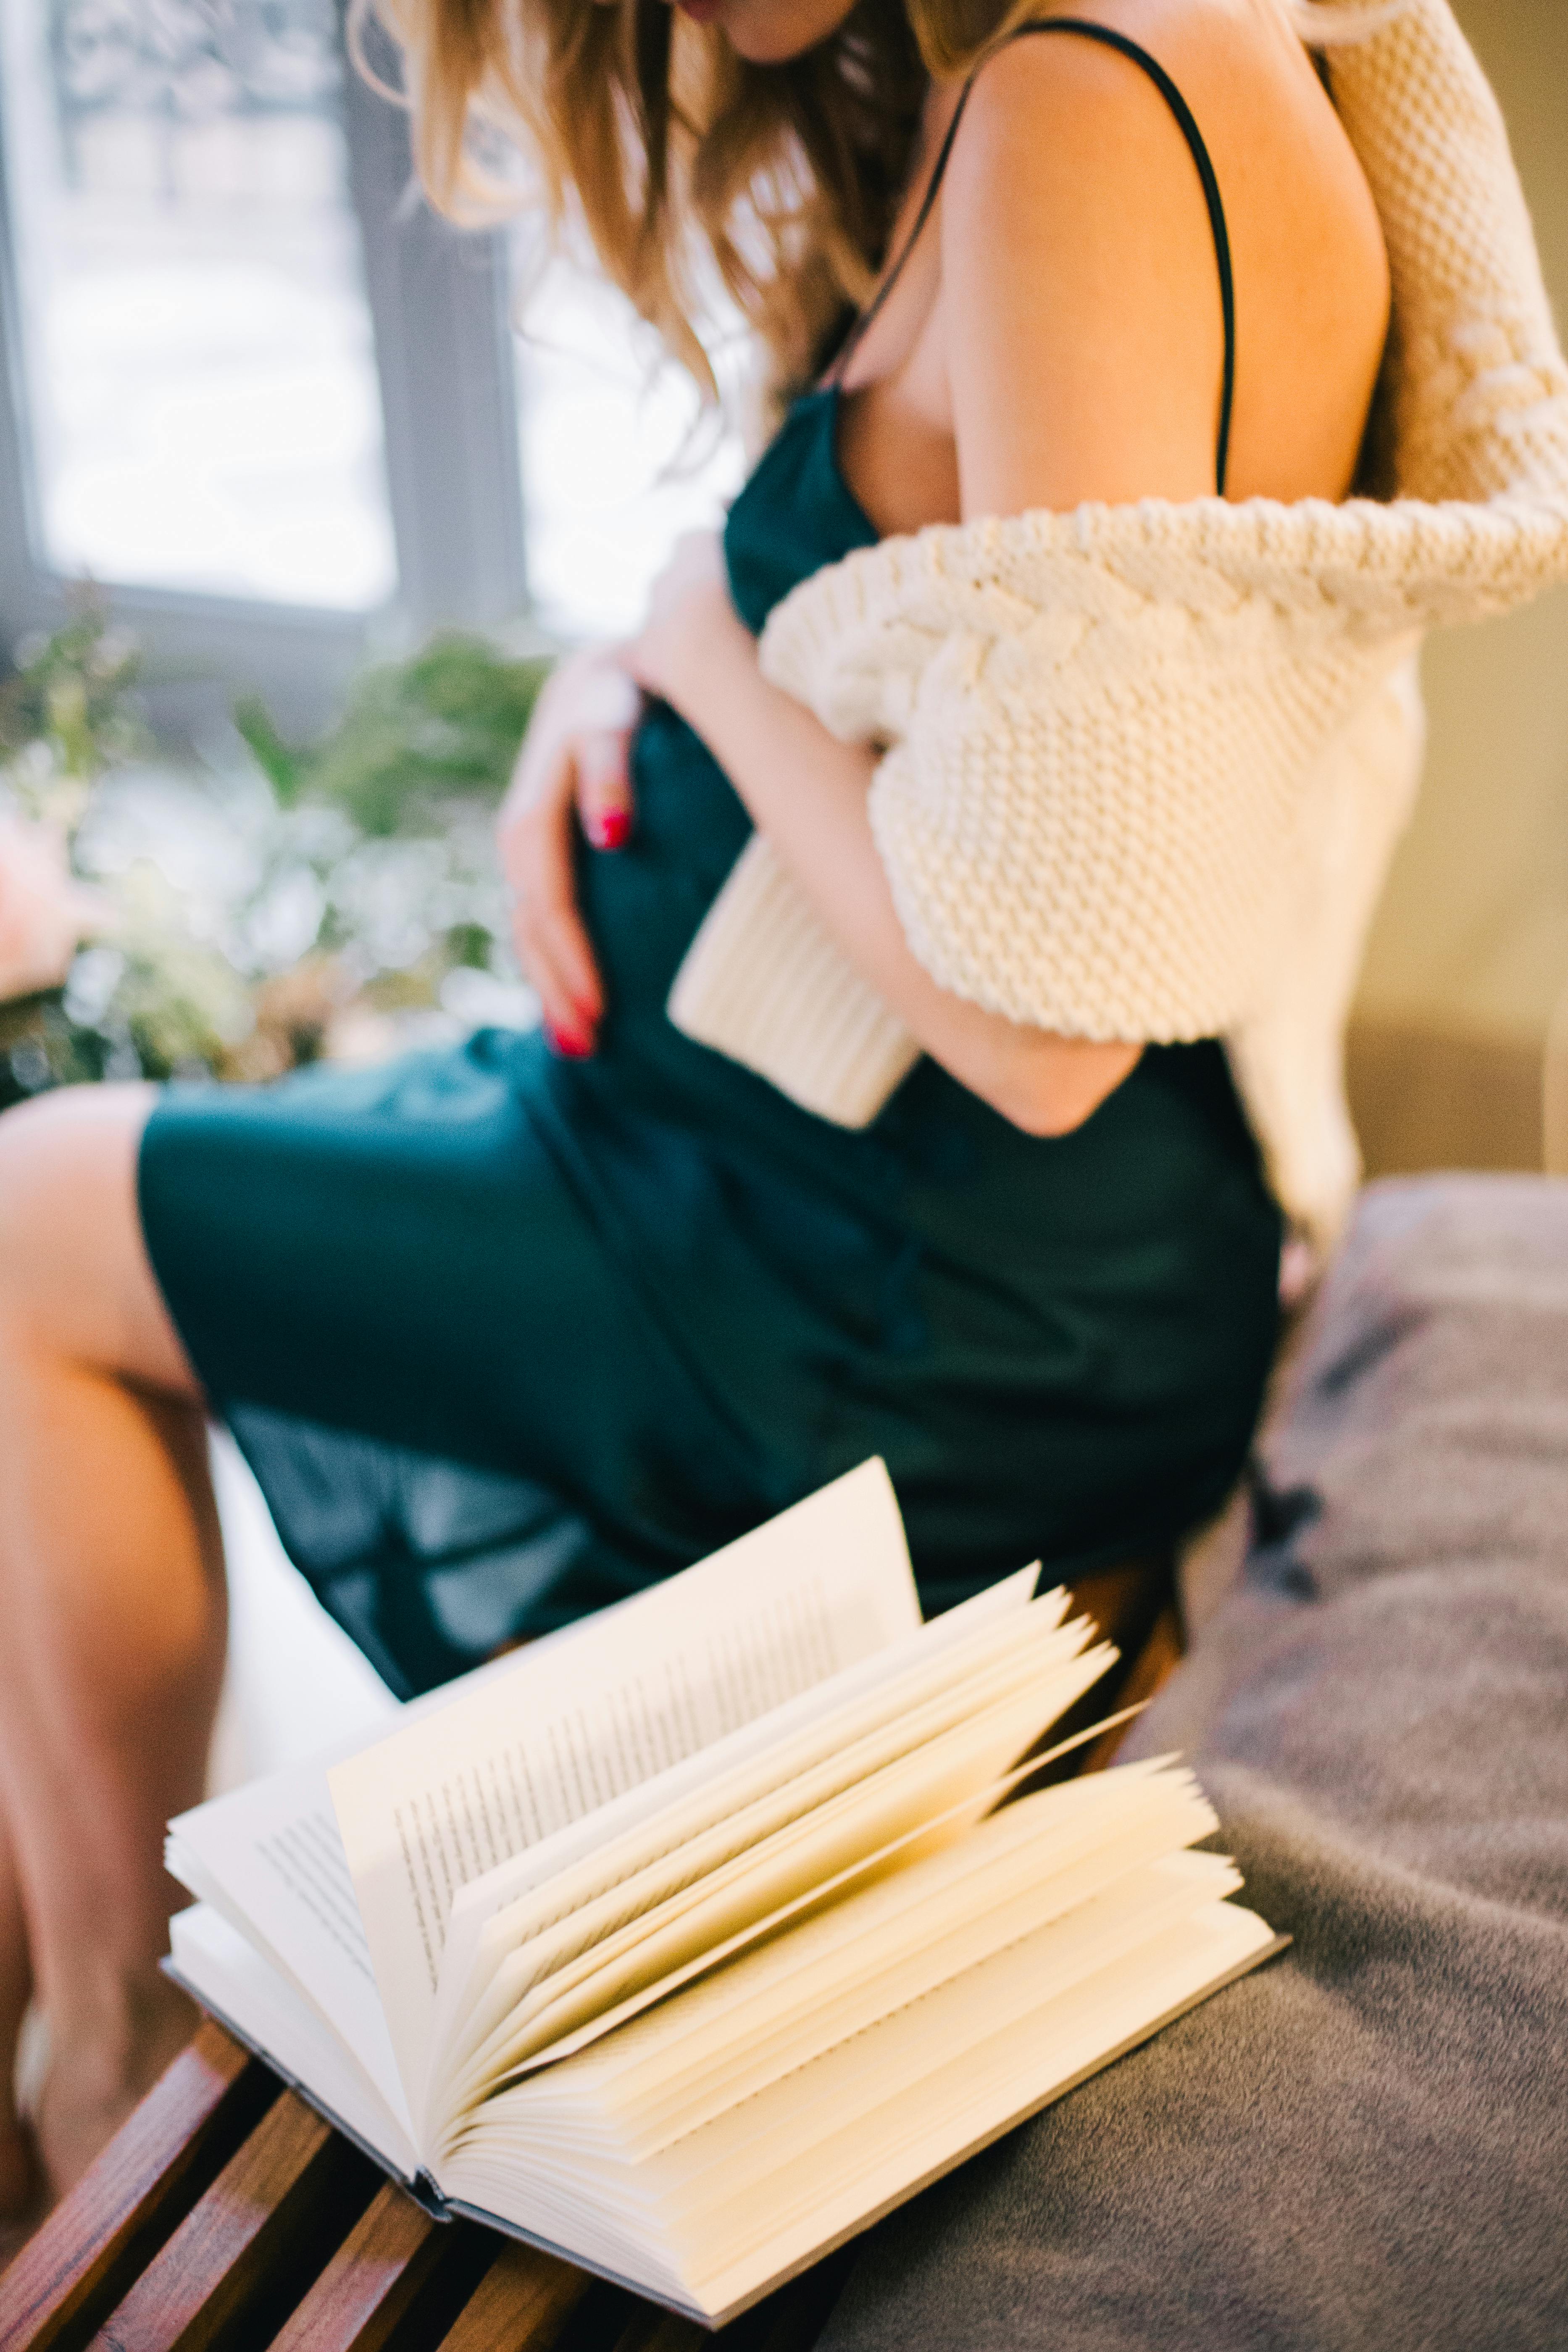 Pregnant woman sitting on a chair. | Photo: Pexels